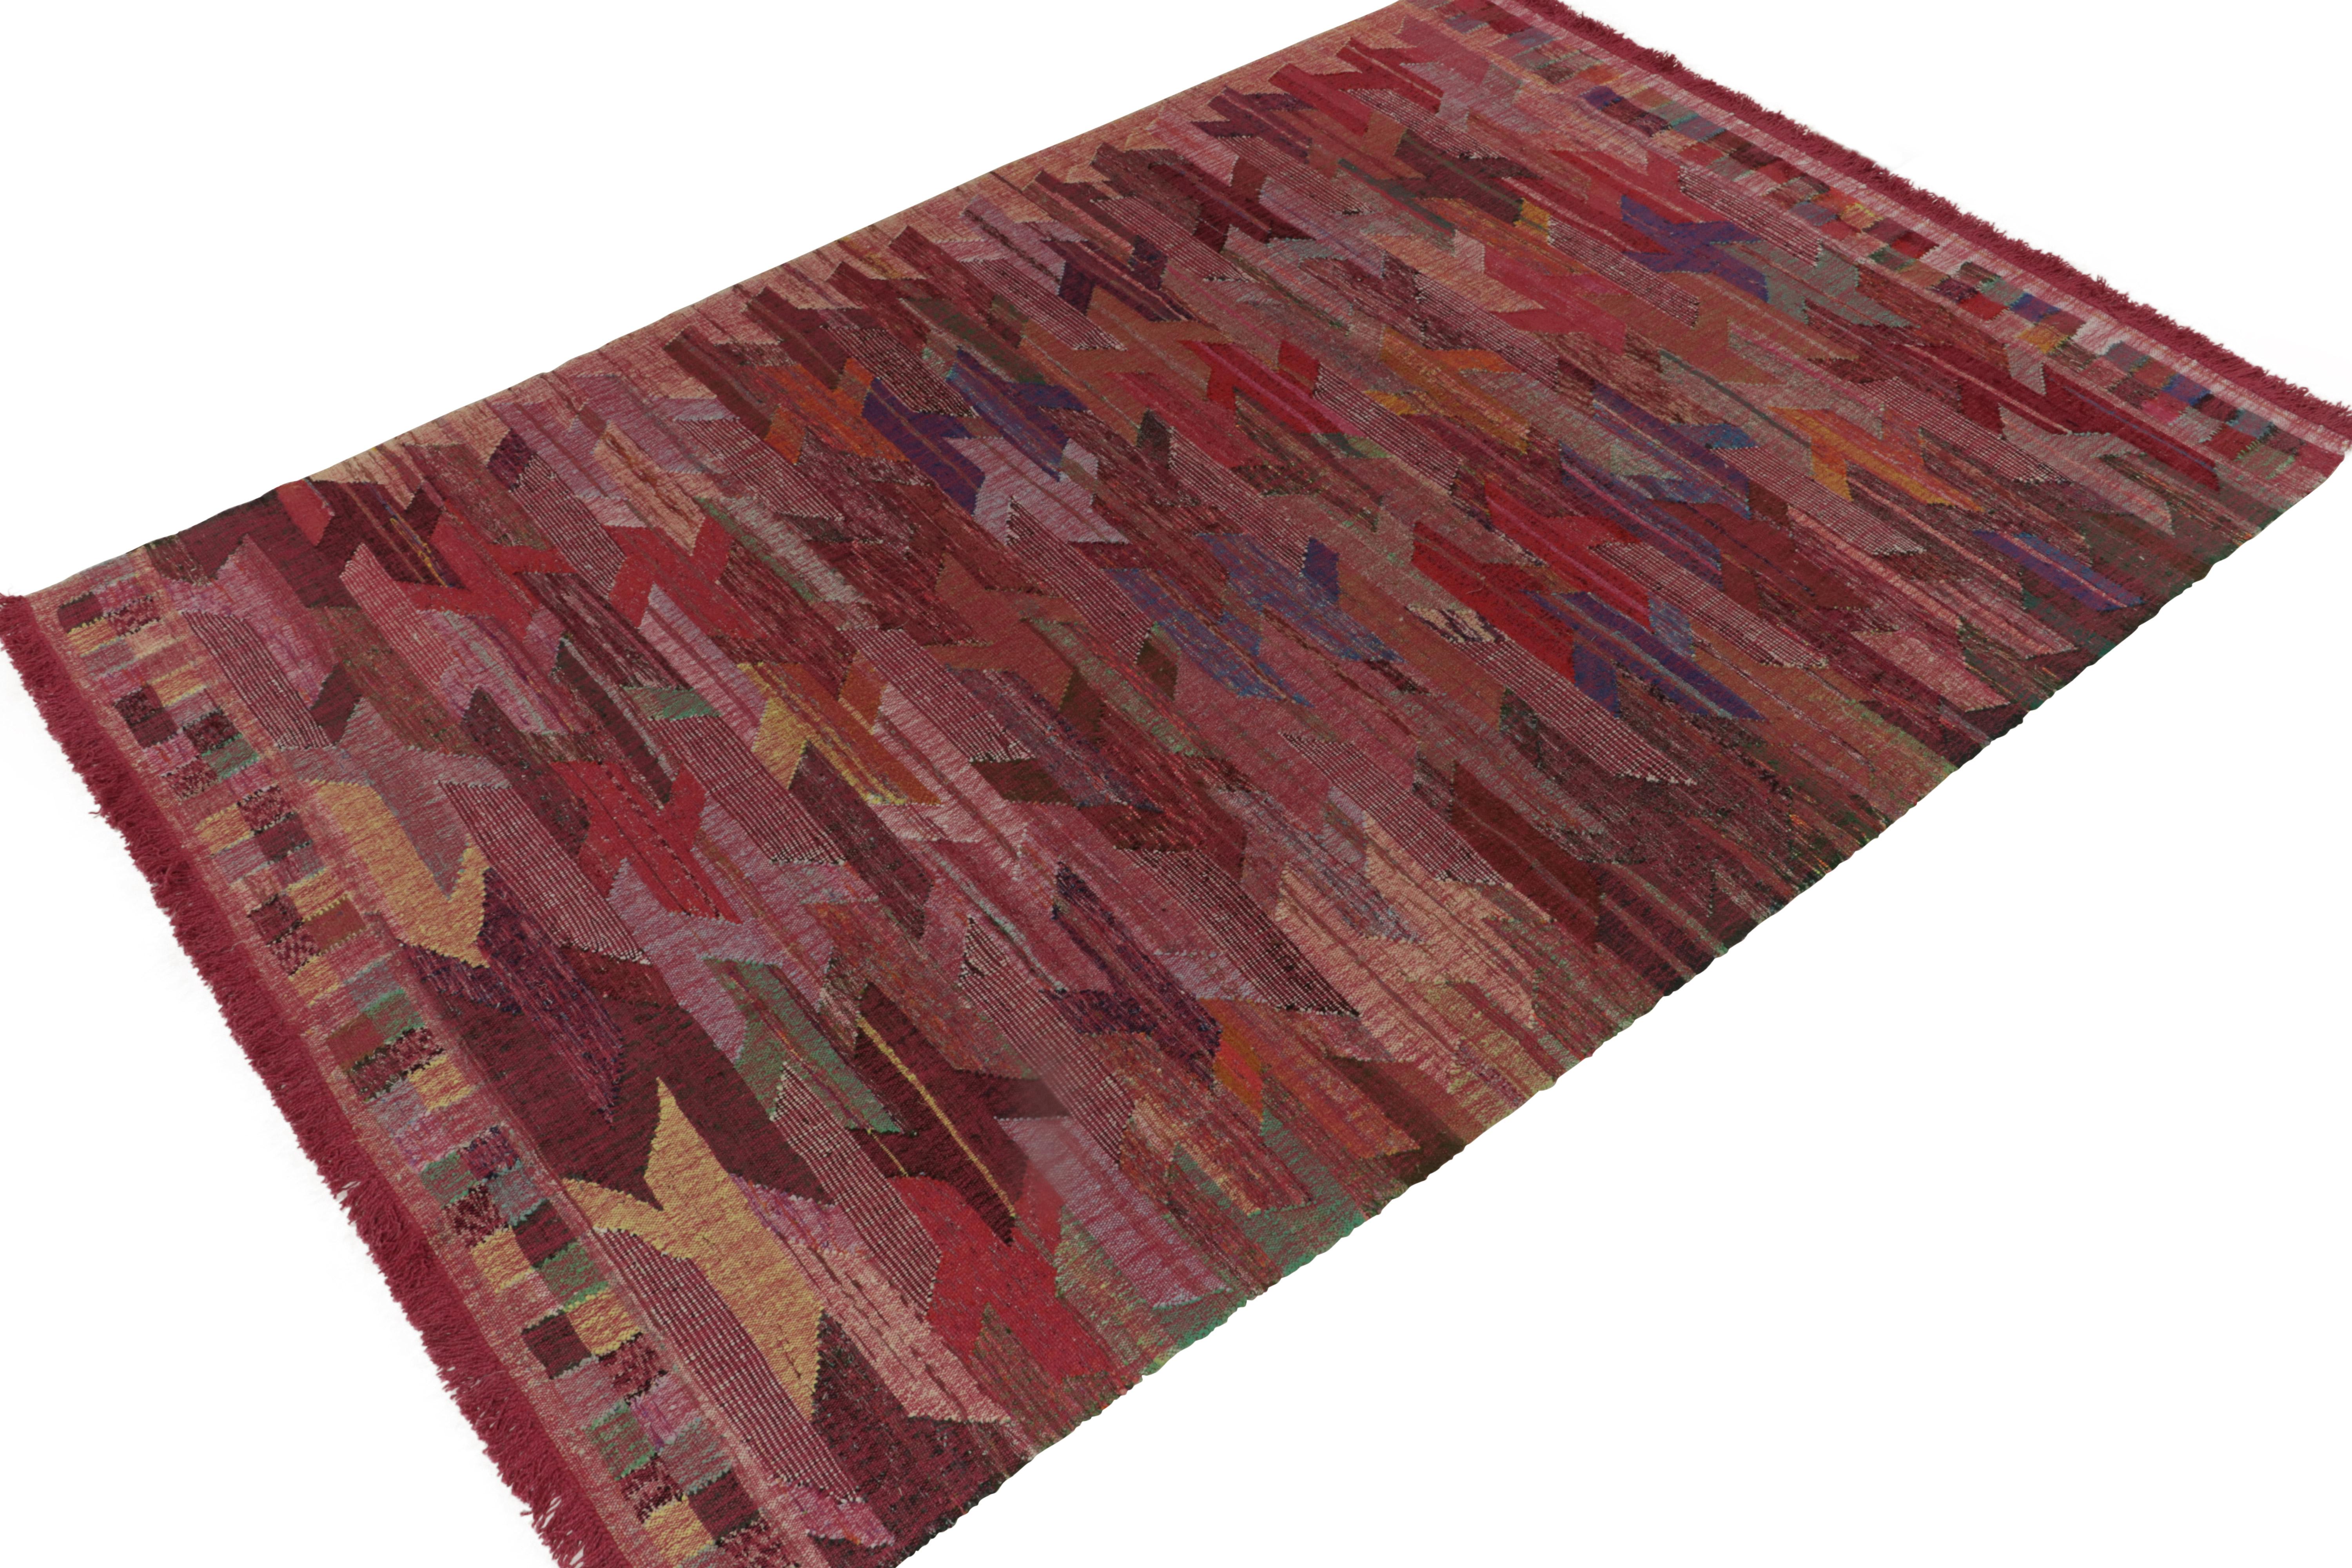 Rug & Kilim presents an 8x12 Kilim from one of Josh Nazmiyal’s most cherished, creative new flat weave collections. 

On the Design: This is a new favorite from a special series, crafted by repurposing vintage yarns into these intricate new weaves.